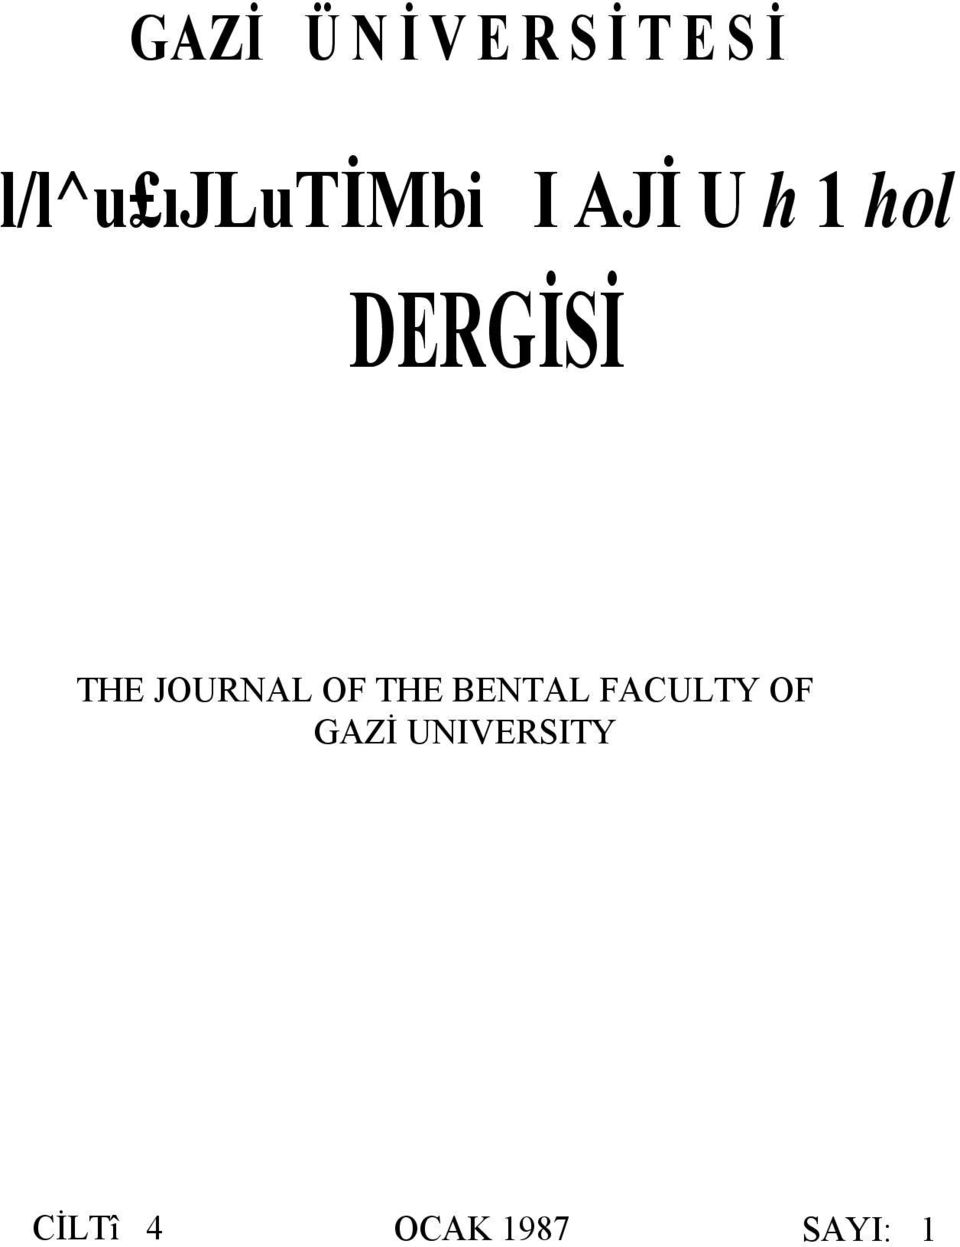 THE JOURNAL OF THE BENTAL FACULTY